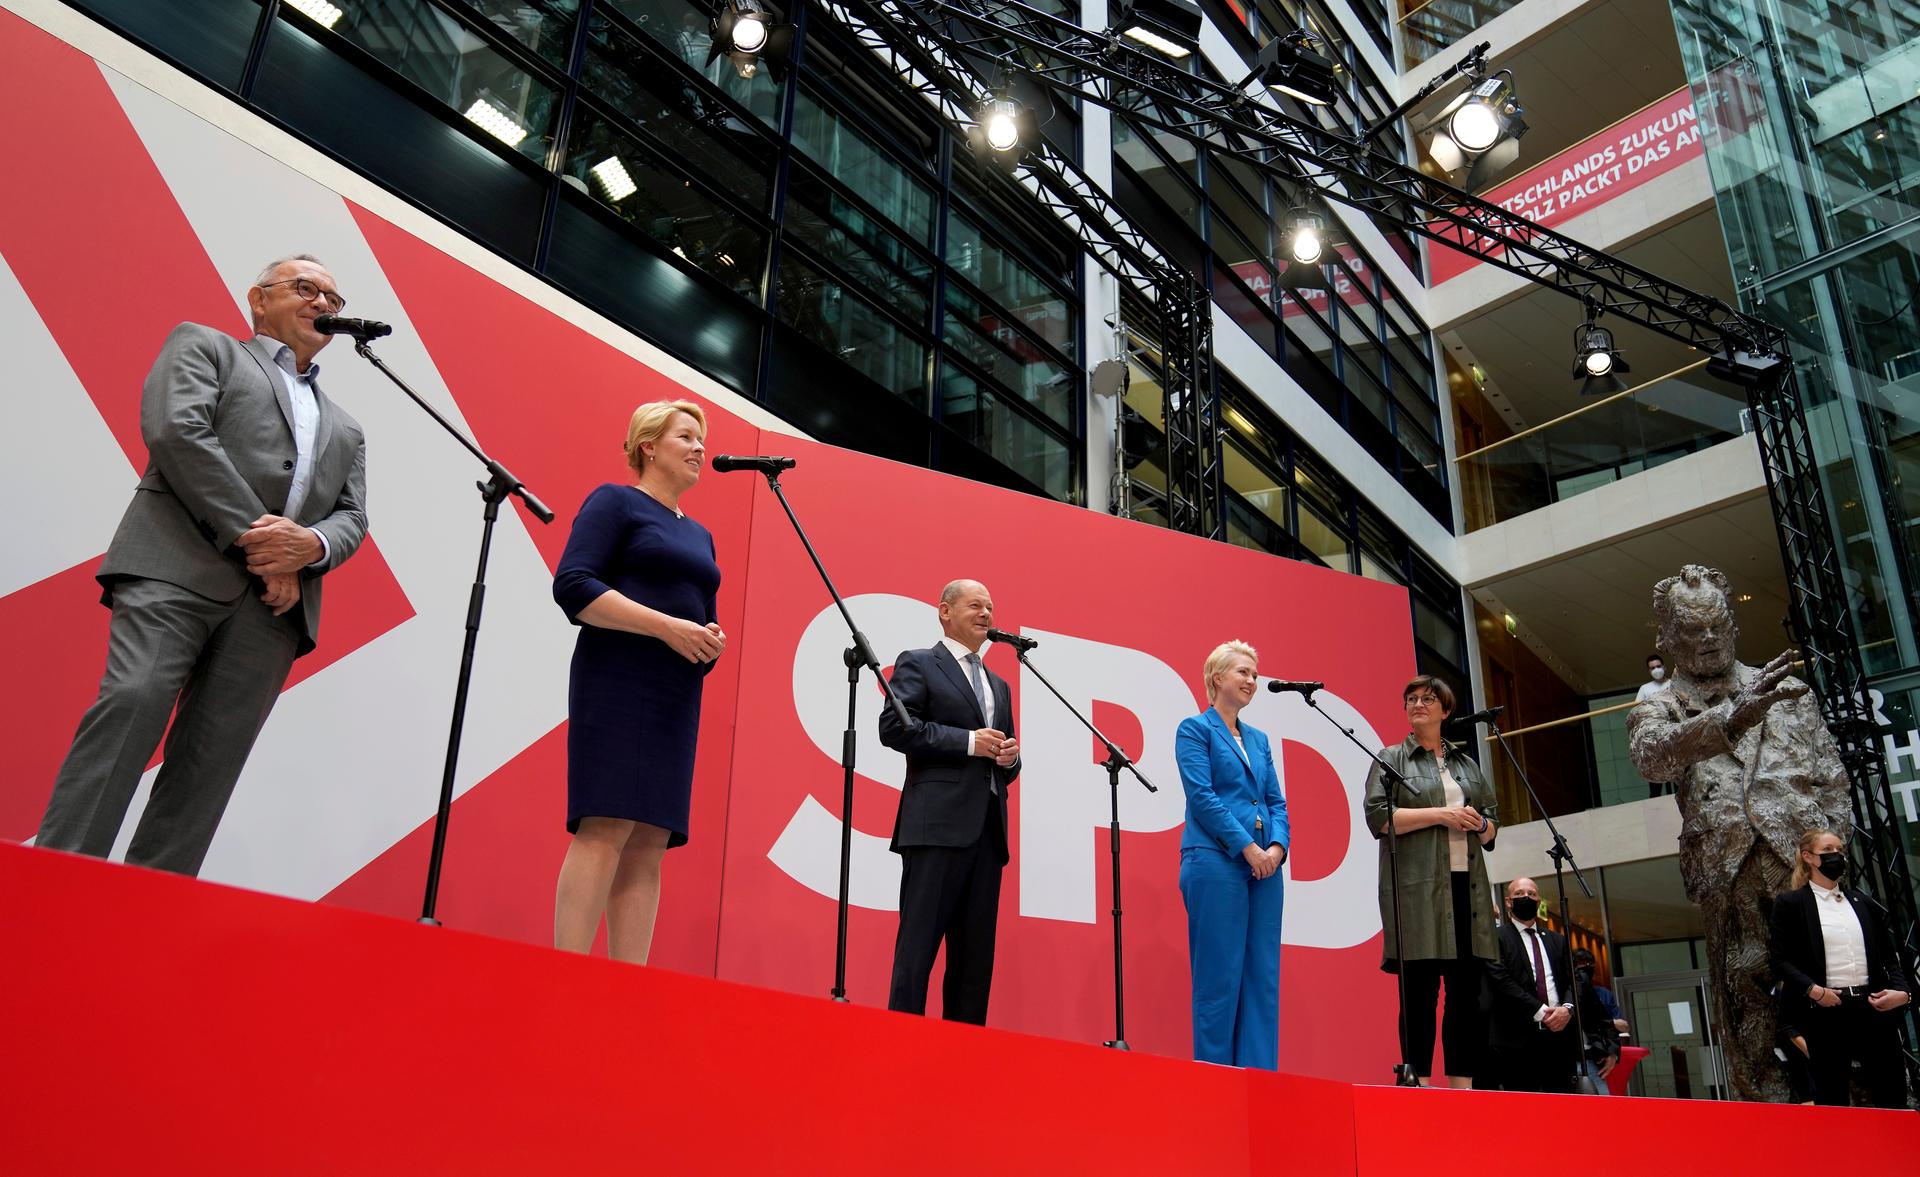 Olaf Scholz, center, top candidate for chancellor of the Social Democratic Party (SPD), speaks during a press conference at the party's headquarters in Berlin, Germany